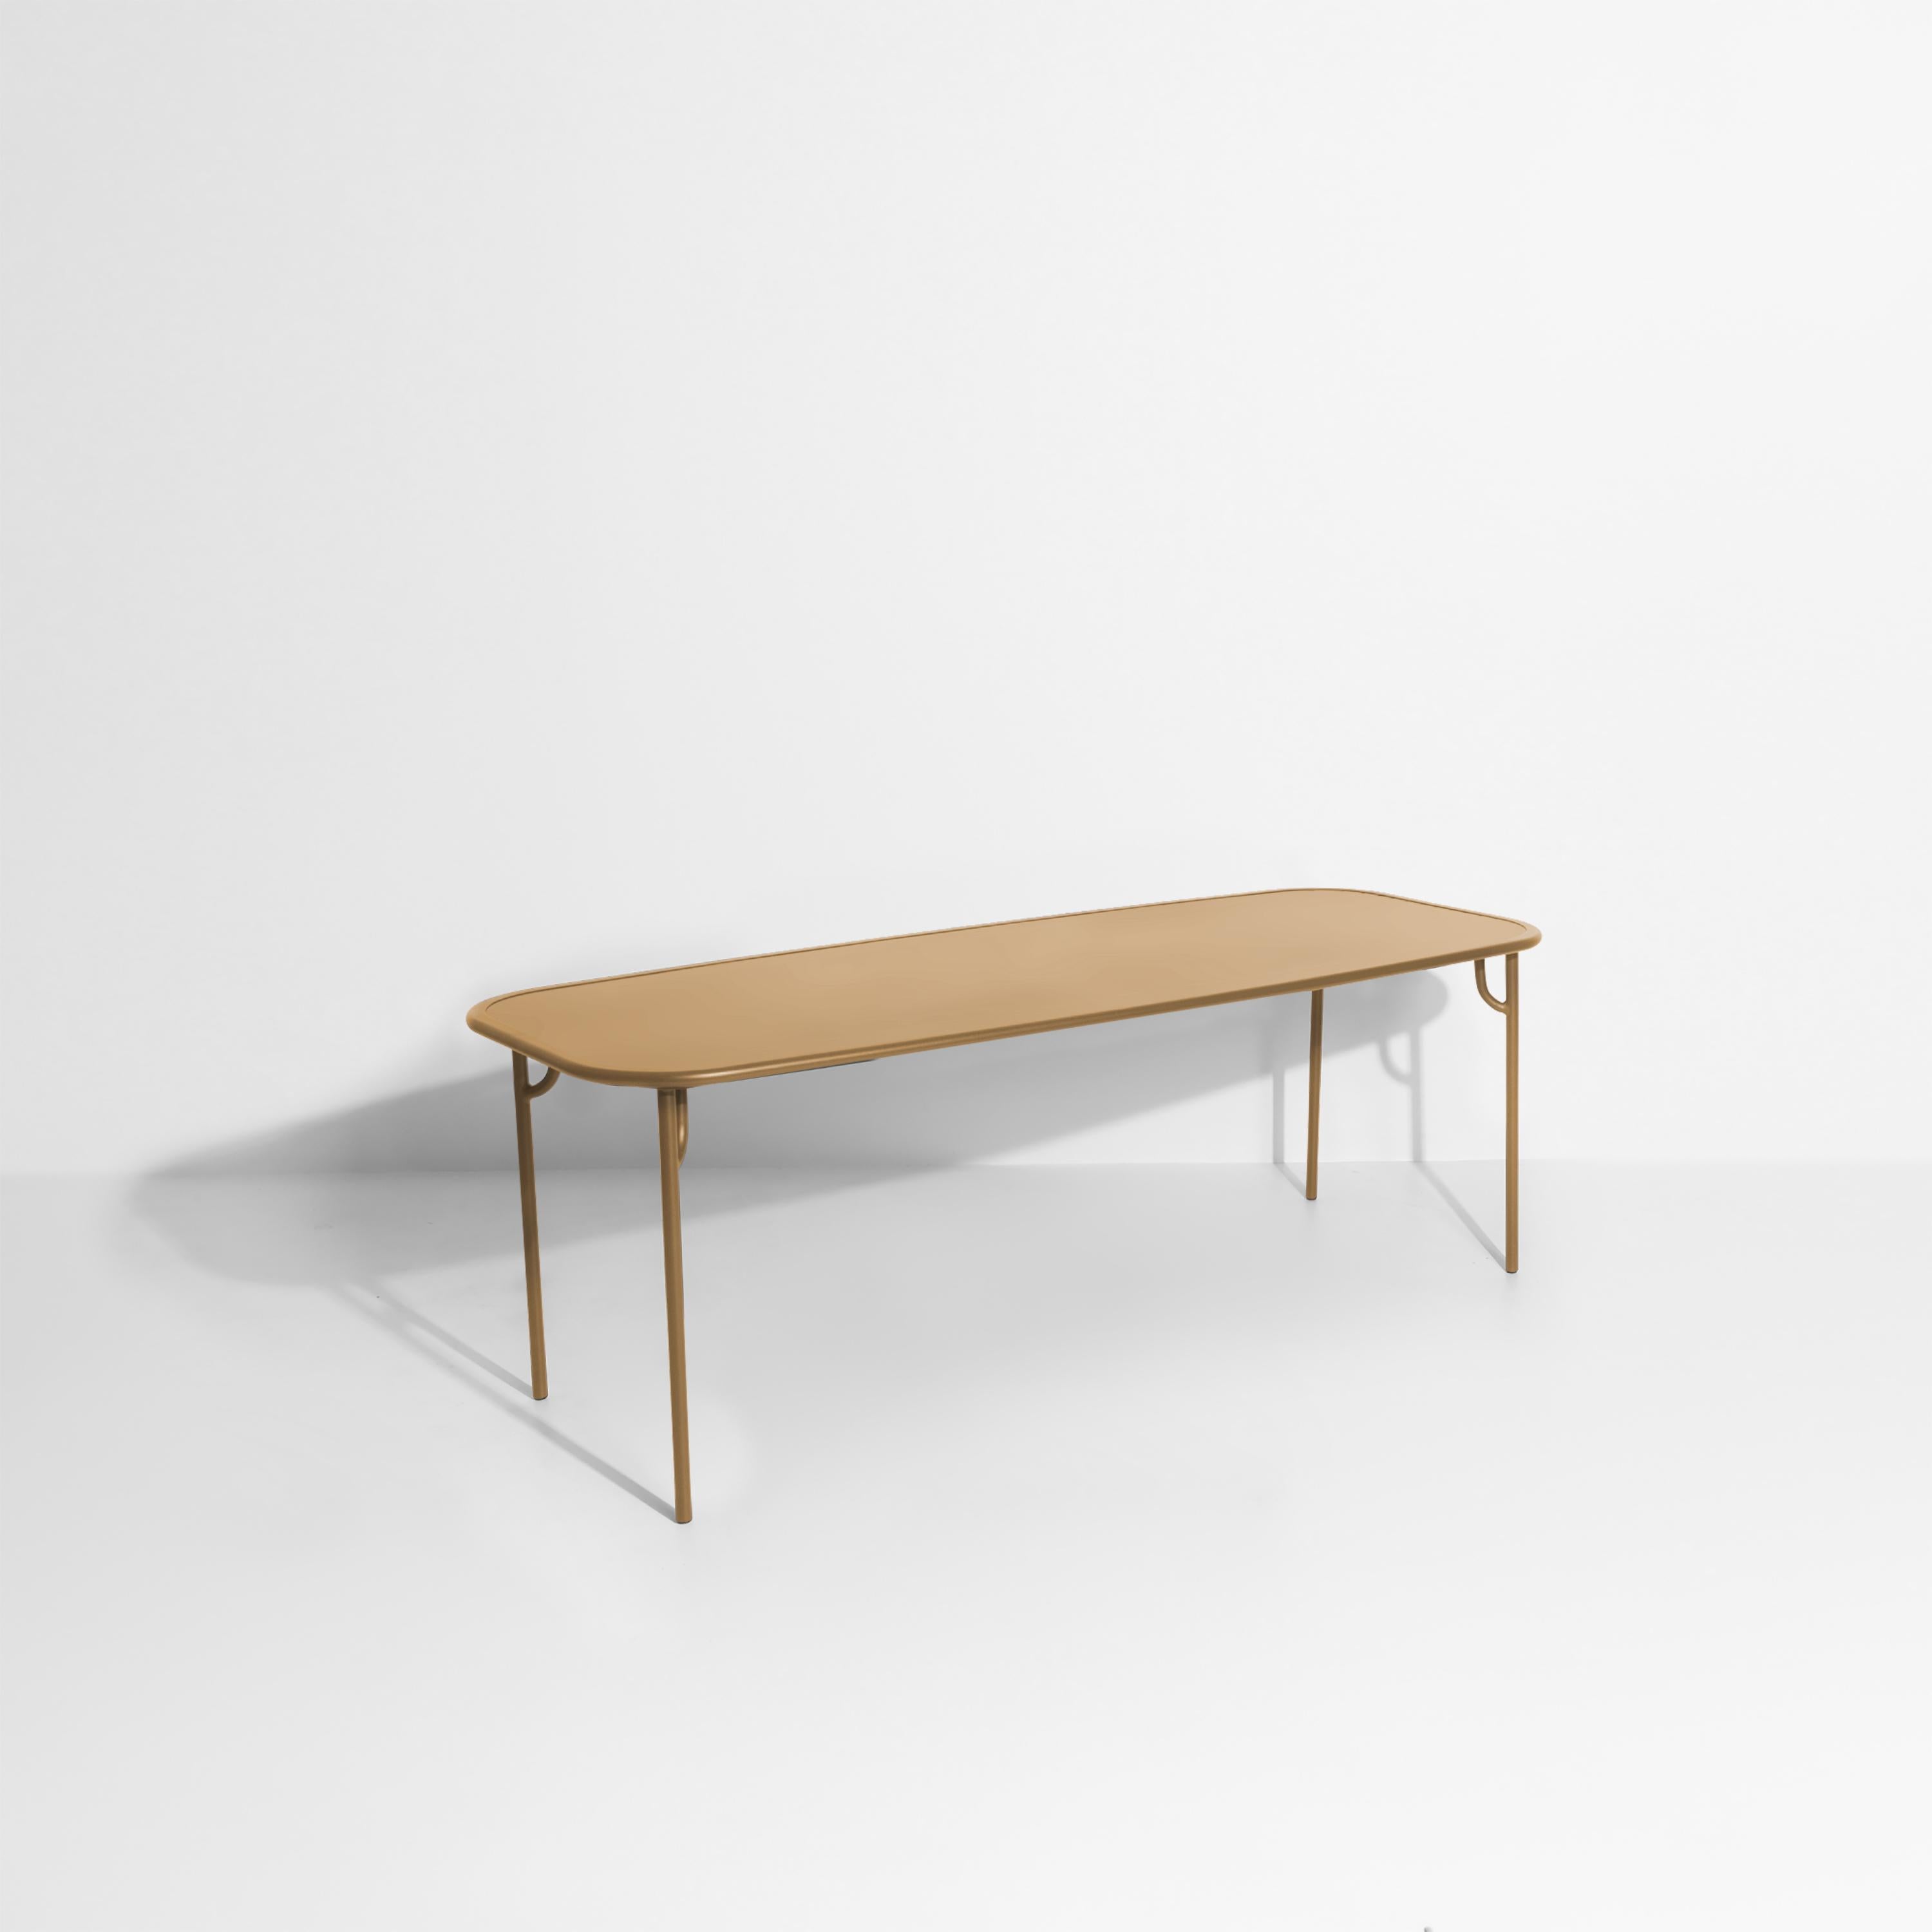 Petite Friture Week-End Large Plain Rectangular Dining Table in Gold Aluminium by Studio BrichetZiegler, 2017

The week-end collection is a full range of outdoor furniture, in aluminium grained epoxy paint, matt finish, that includes 18 functions